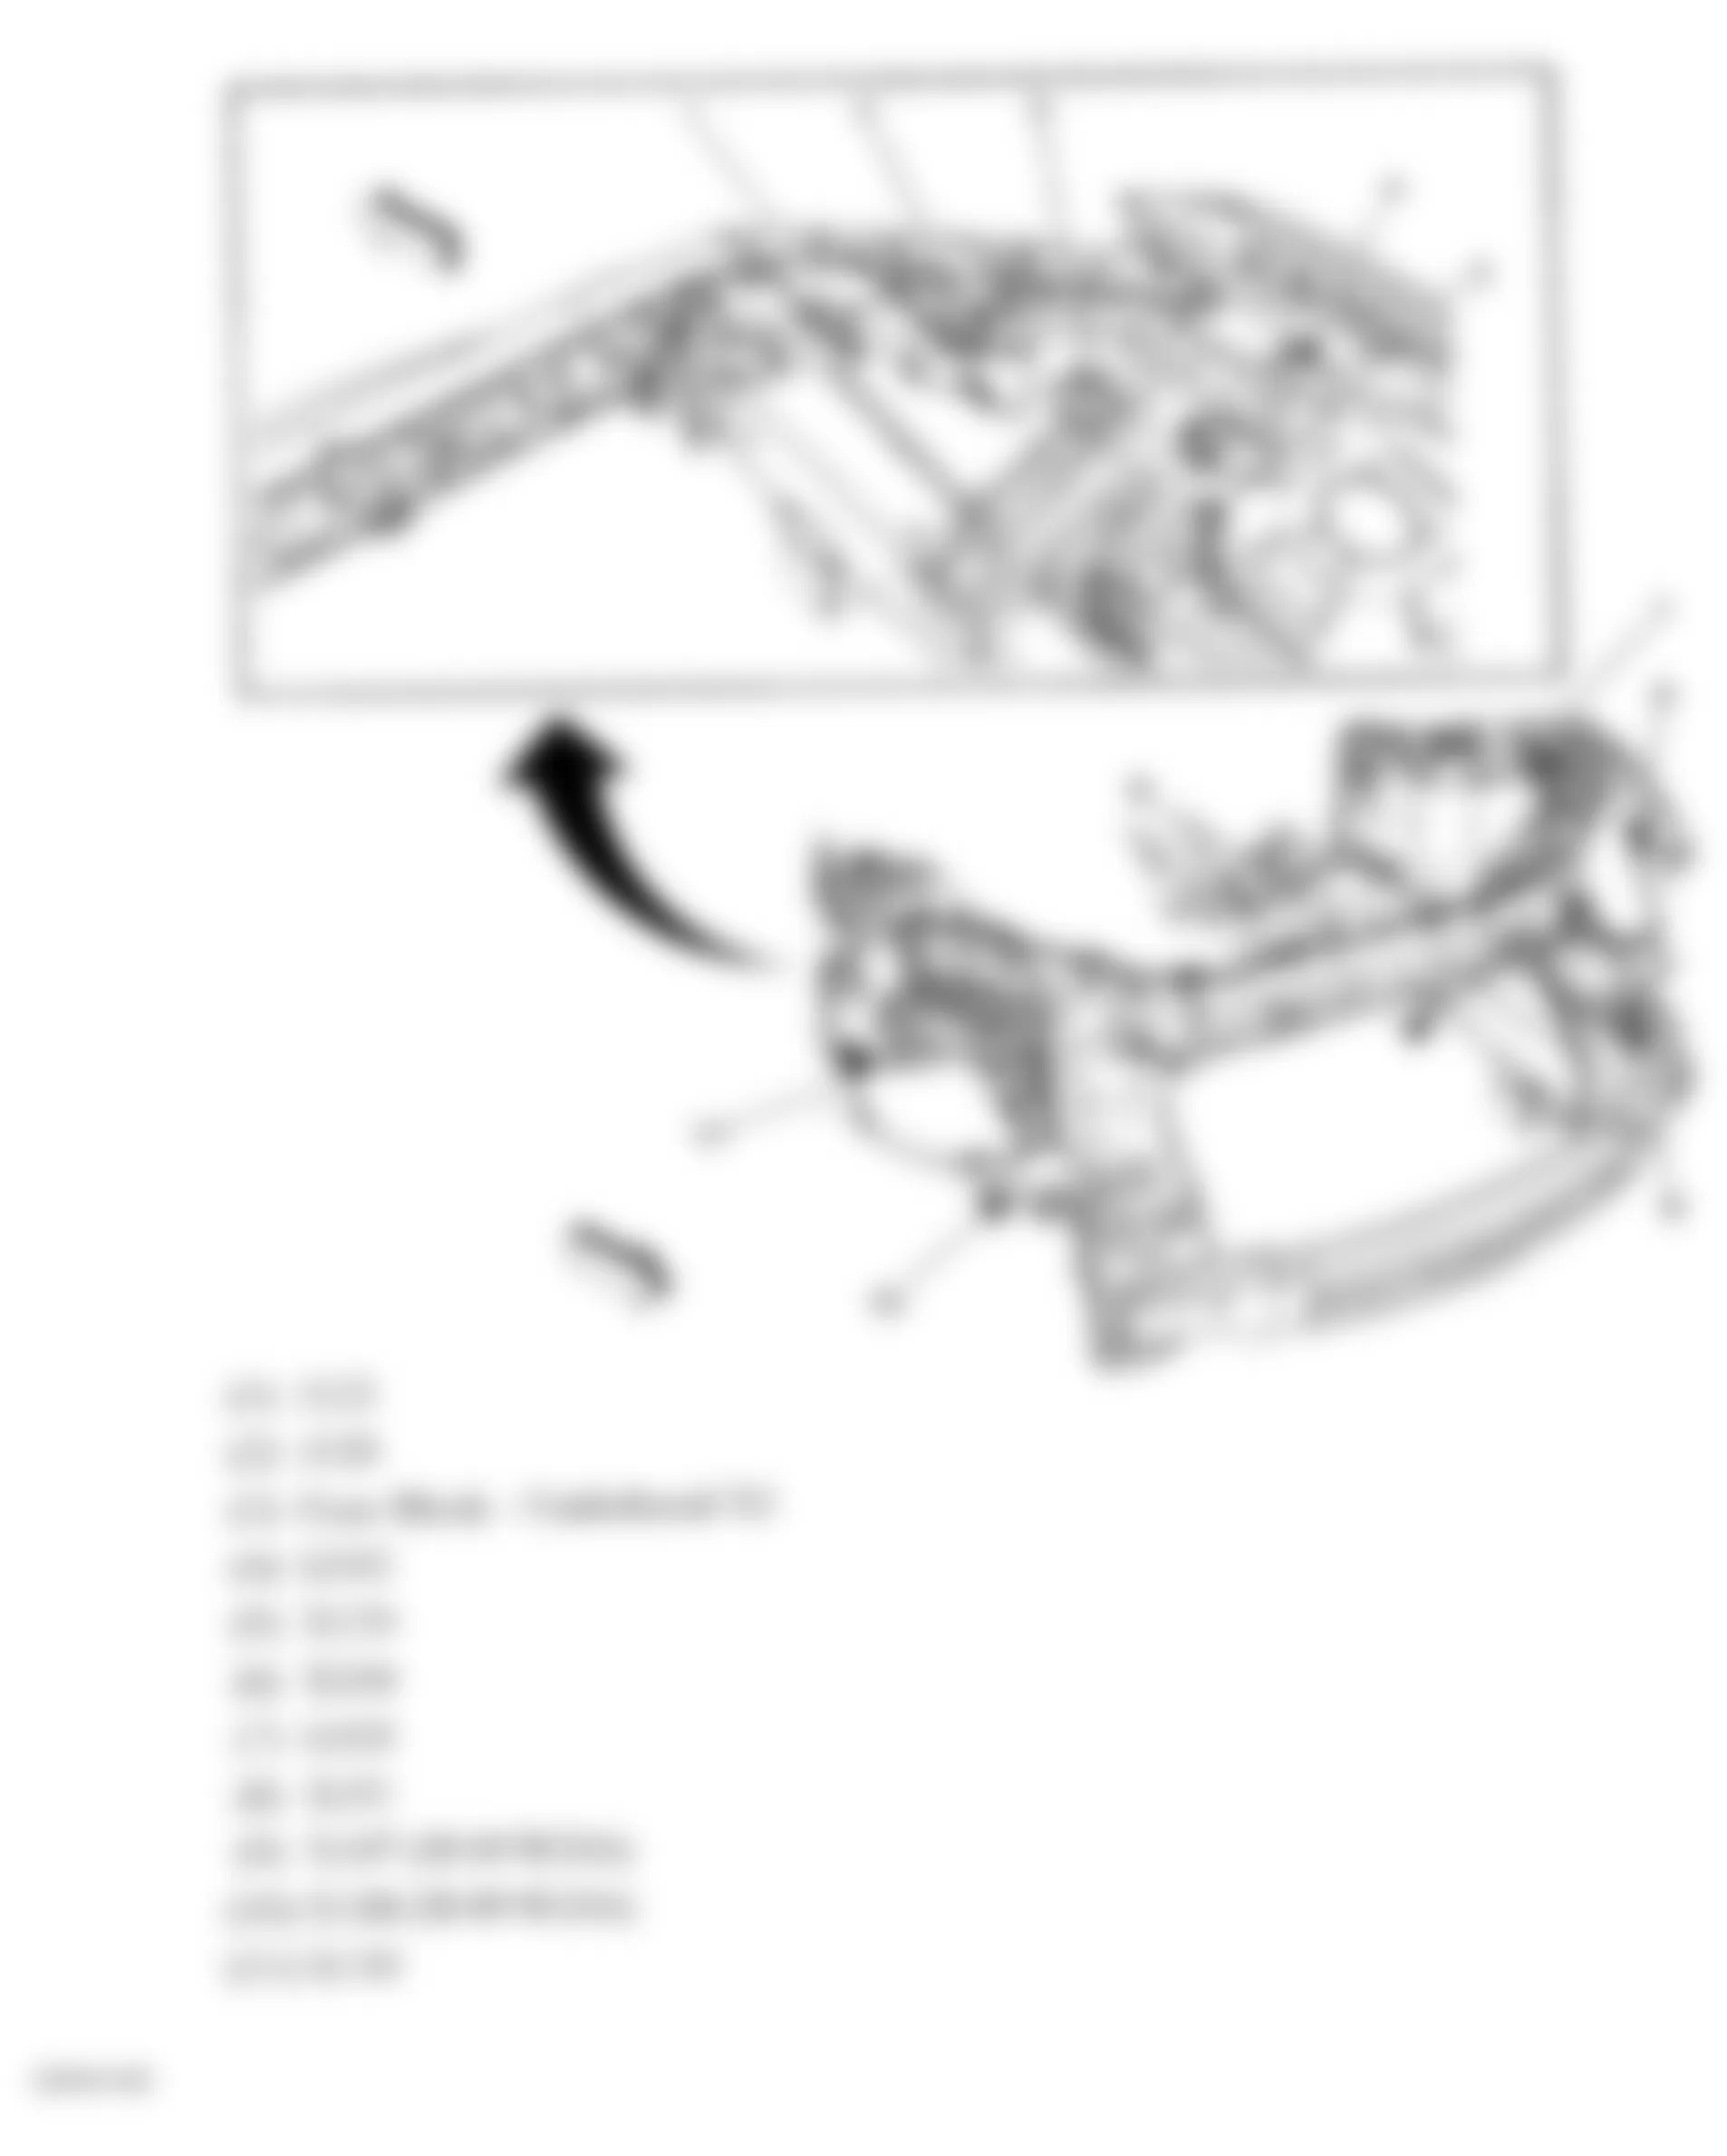 GMC Acadia SLE 2010 - Component Locations -  Engine Compartment